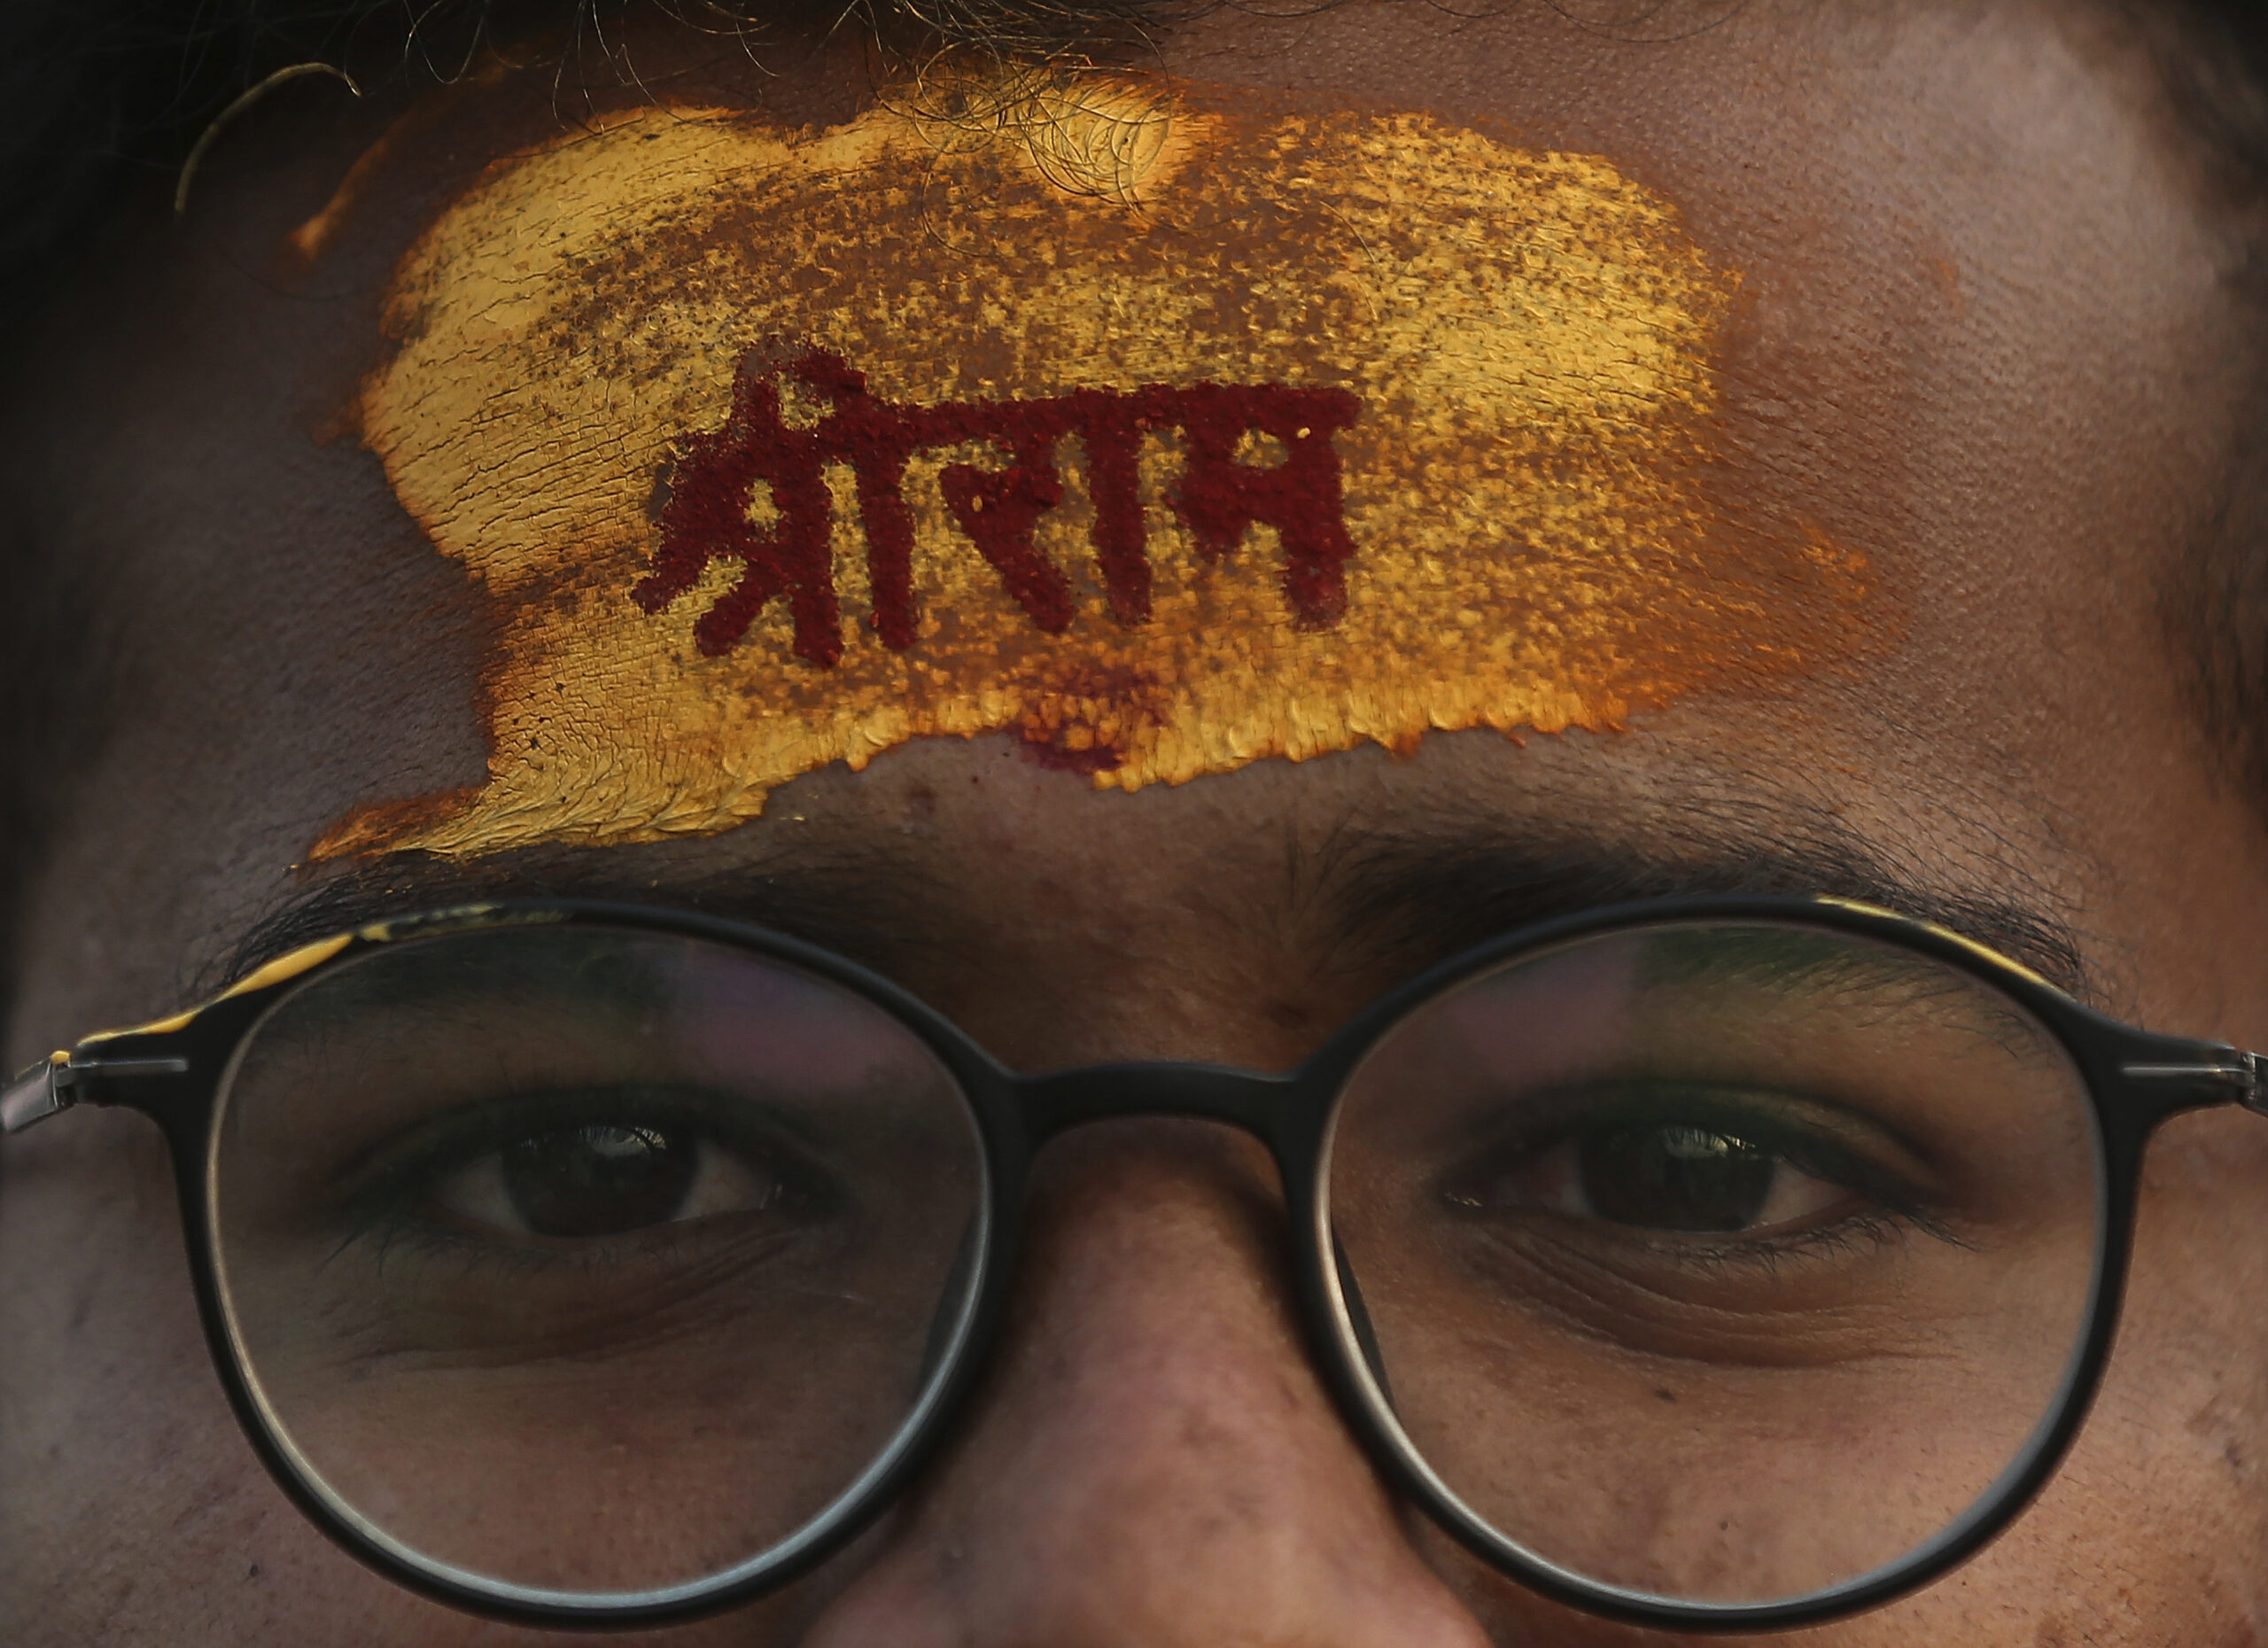 A devotee has the name of Hindu god Rama written on his forehead during a religious procession to celebrate Ram Navami, a Hindu festival marking the birth anniversary of Lord Ram, in Hyderabad, India, Sunday, April 10, 2022. India’s hardline Hindu nationalists have long espoused an anti-Muslim stance, but attacks against the minority community have recently occurred more frequently. In Madhya Pradesh state’s Khargone city, the festival turned violent after Hindu mobs brandishing swords and sticks marched past Muslim neighborhoods and mosques. (AP Photo/Mahesh Kumar A., File)